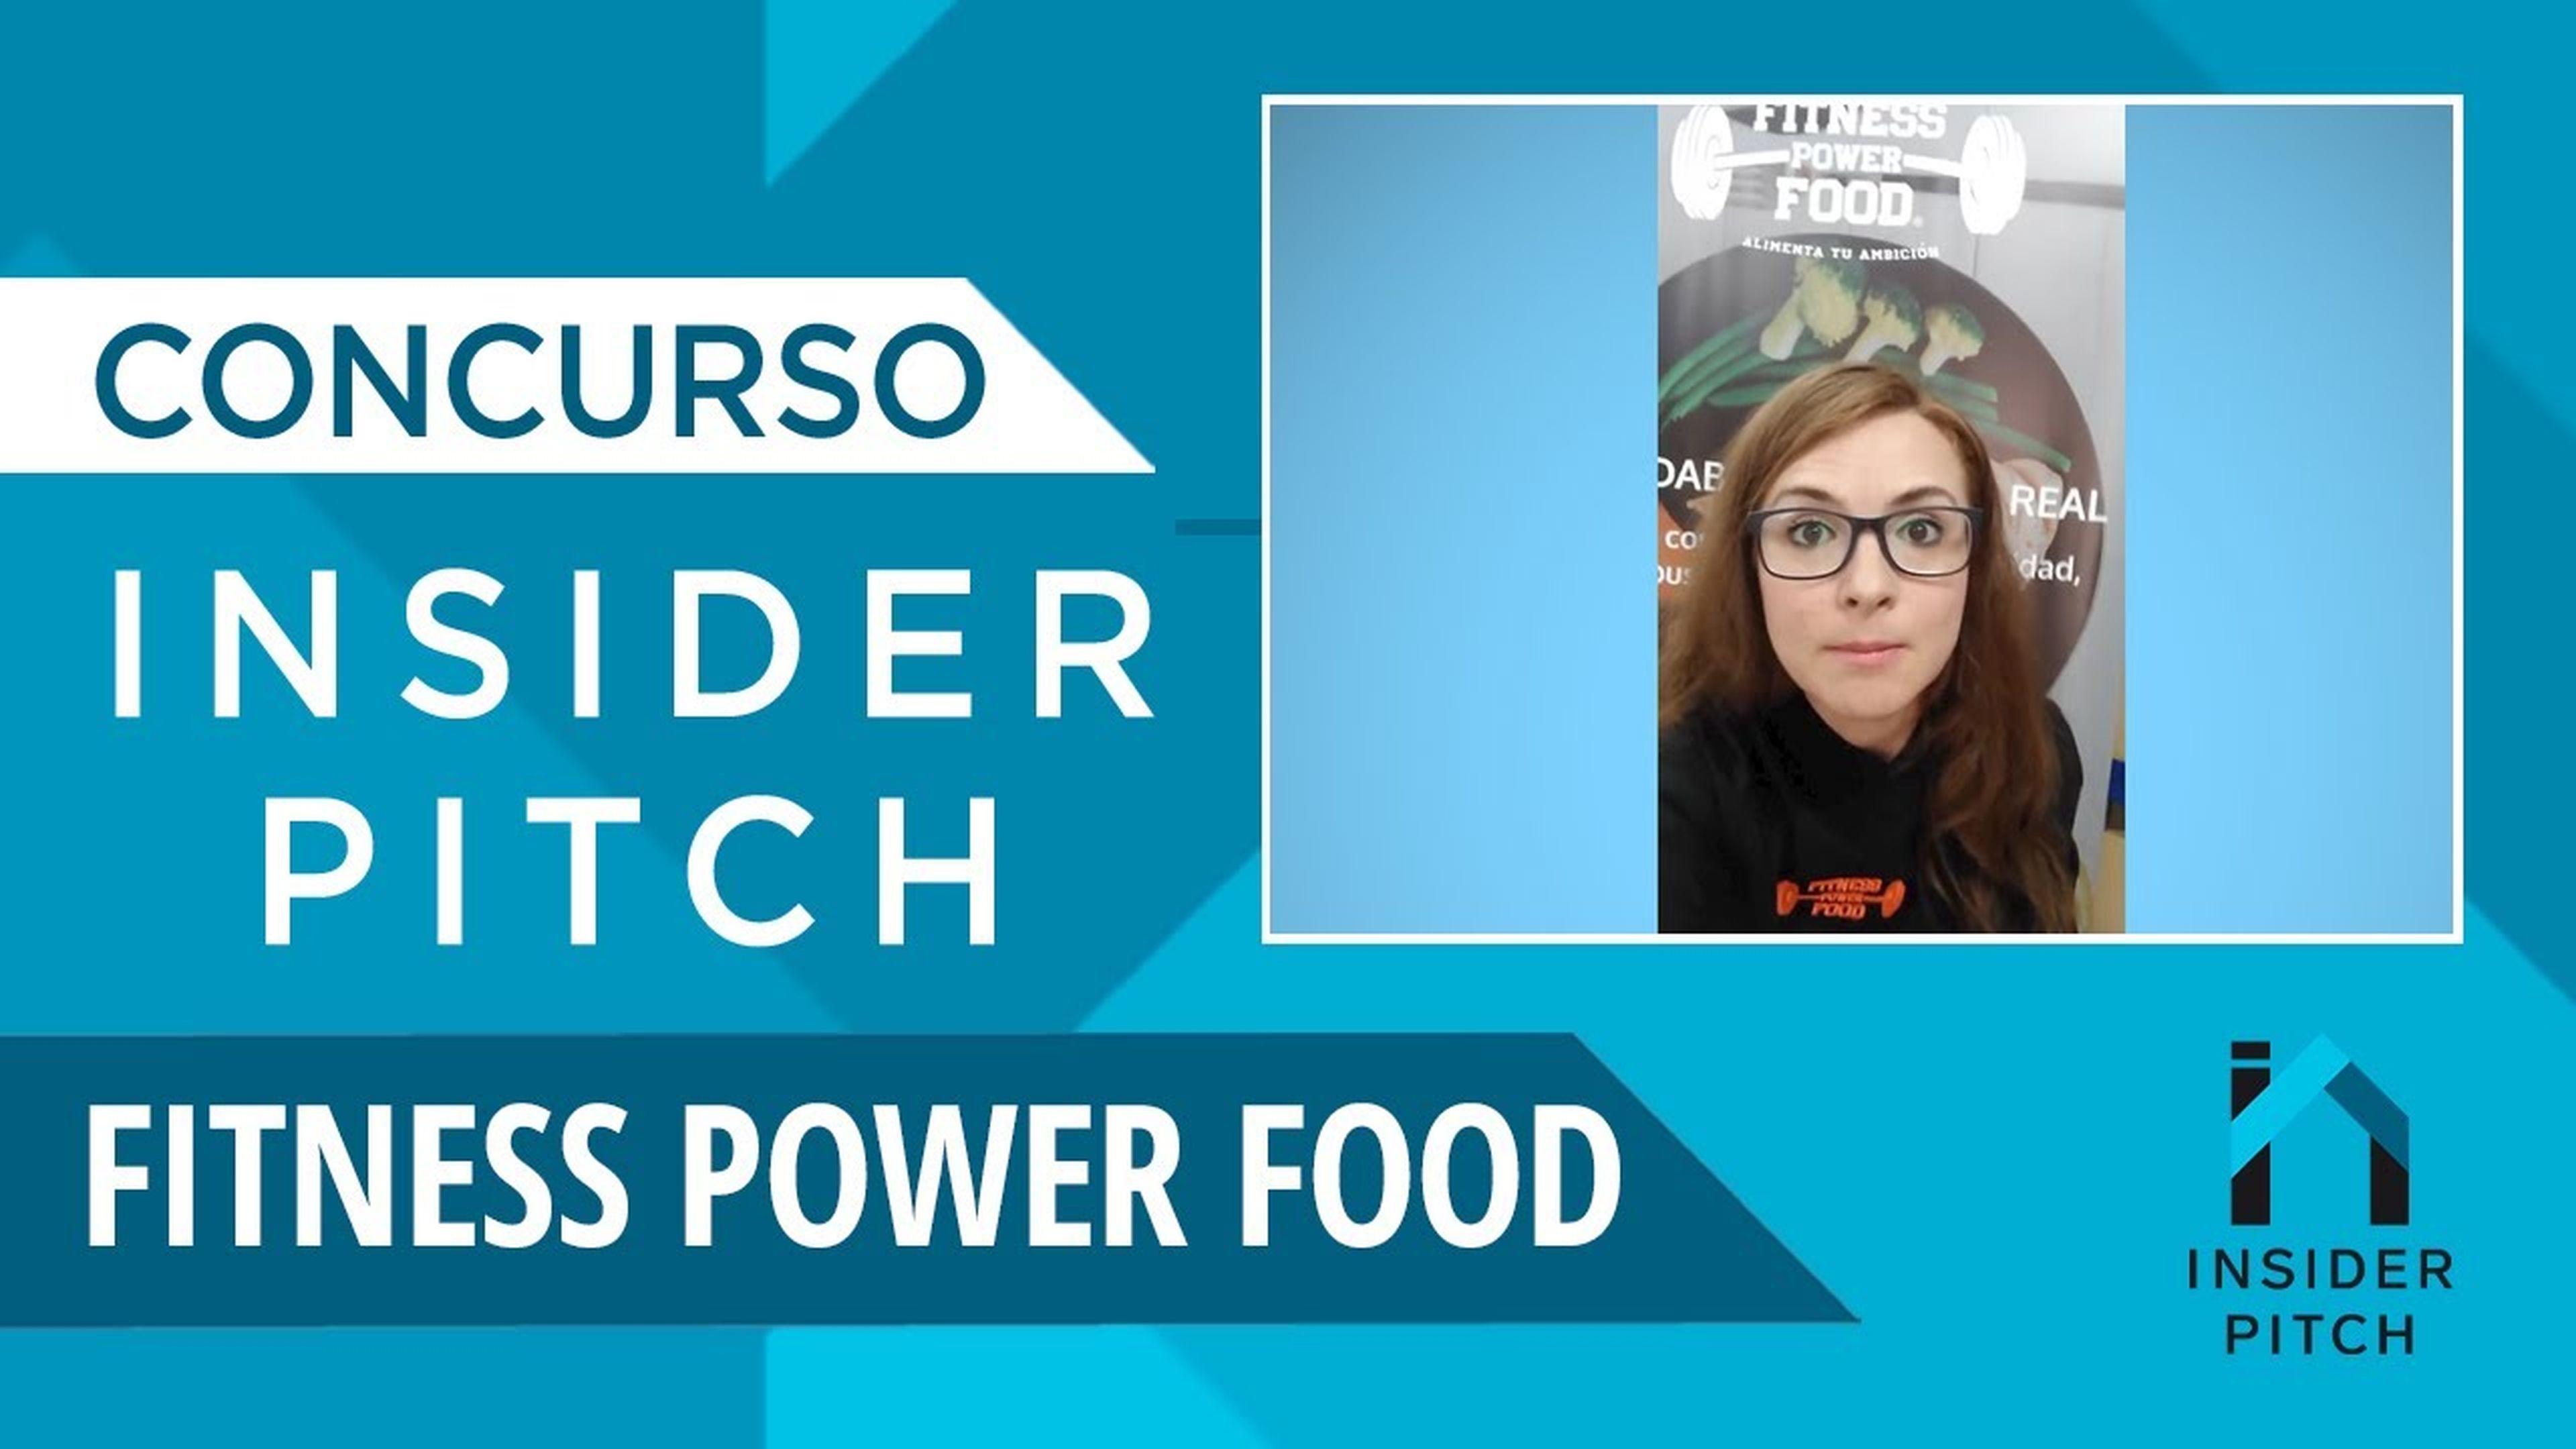 Fitness Power Food | INSIDER PITCH - Cateogría 2